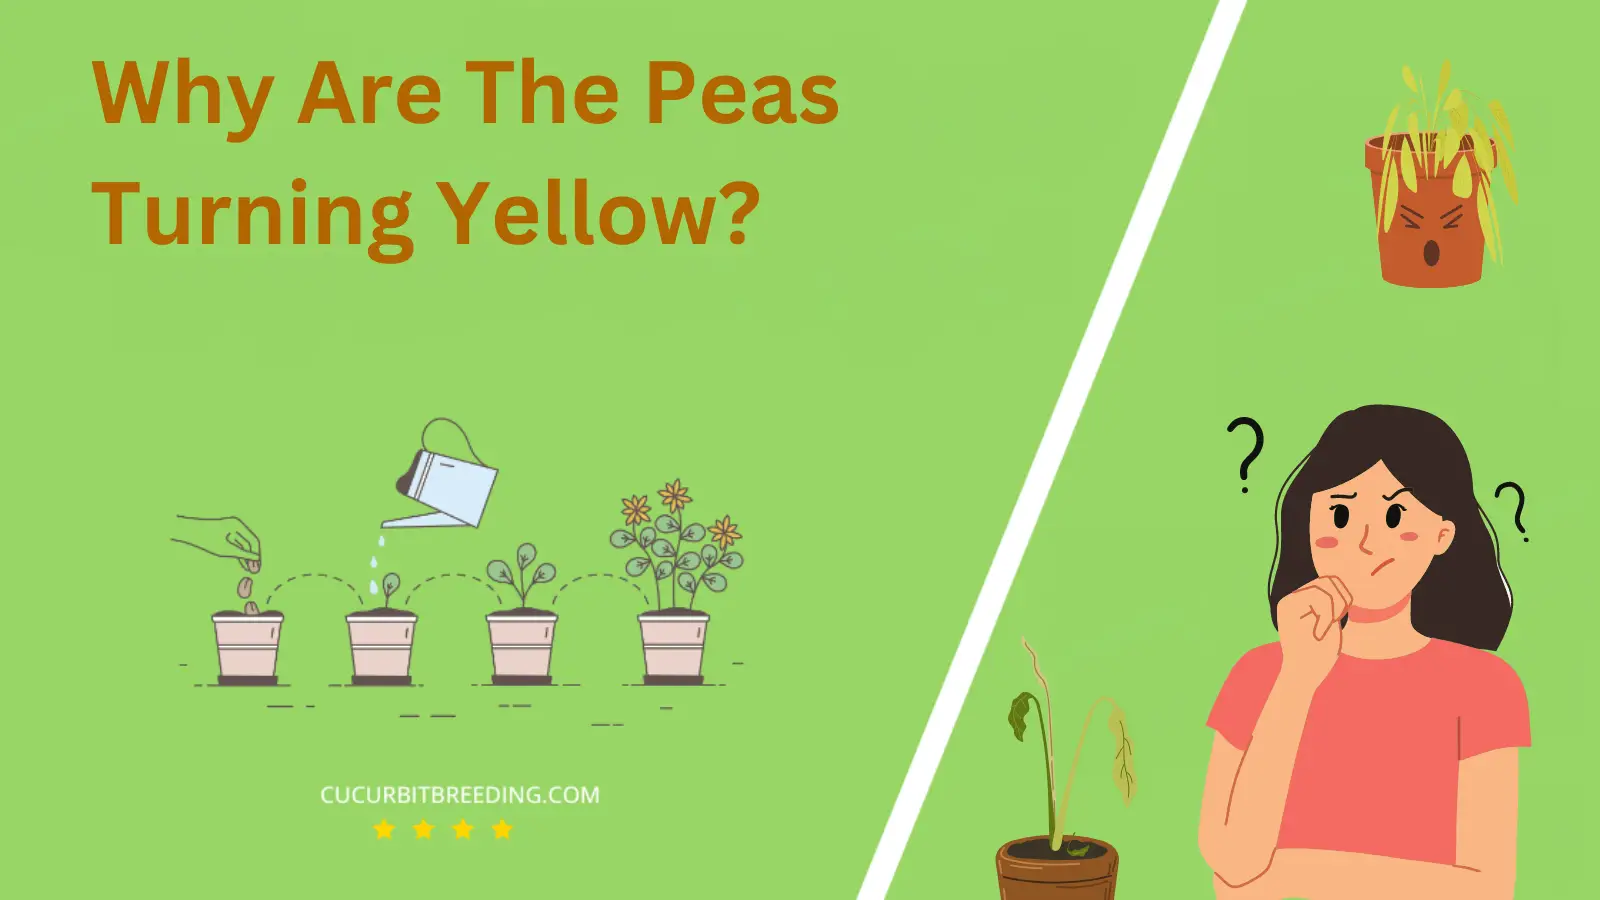 Why Are The Peas Turning Yellow